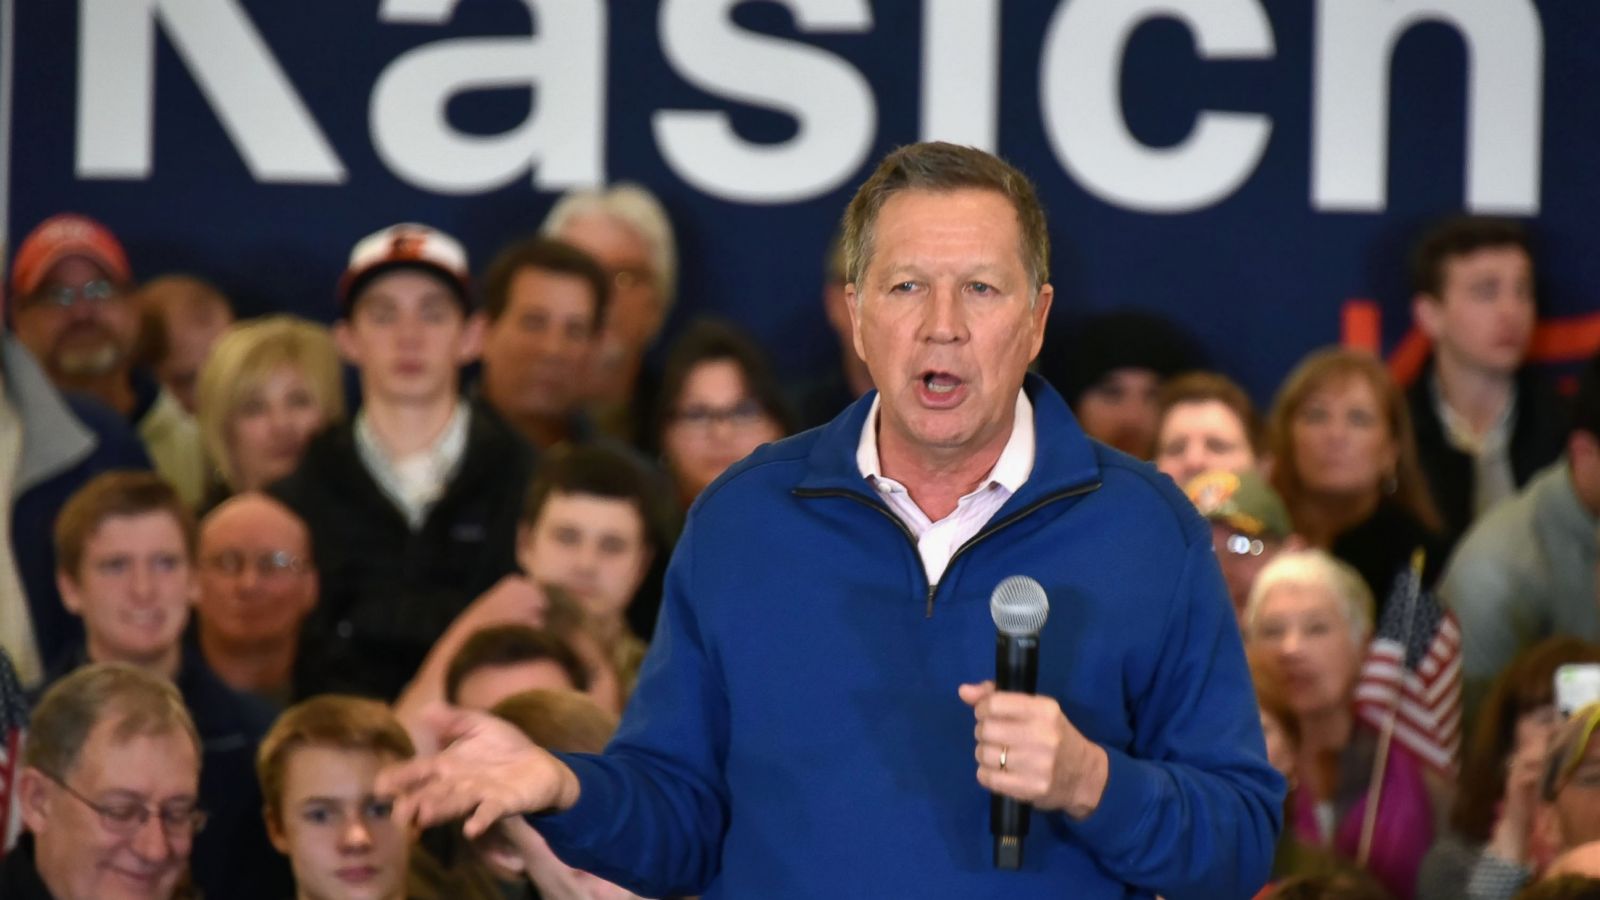 Cruz Super PAC Takes Aim at Kasich With New Ad